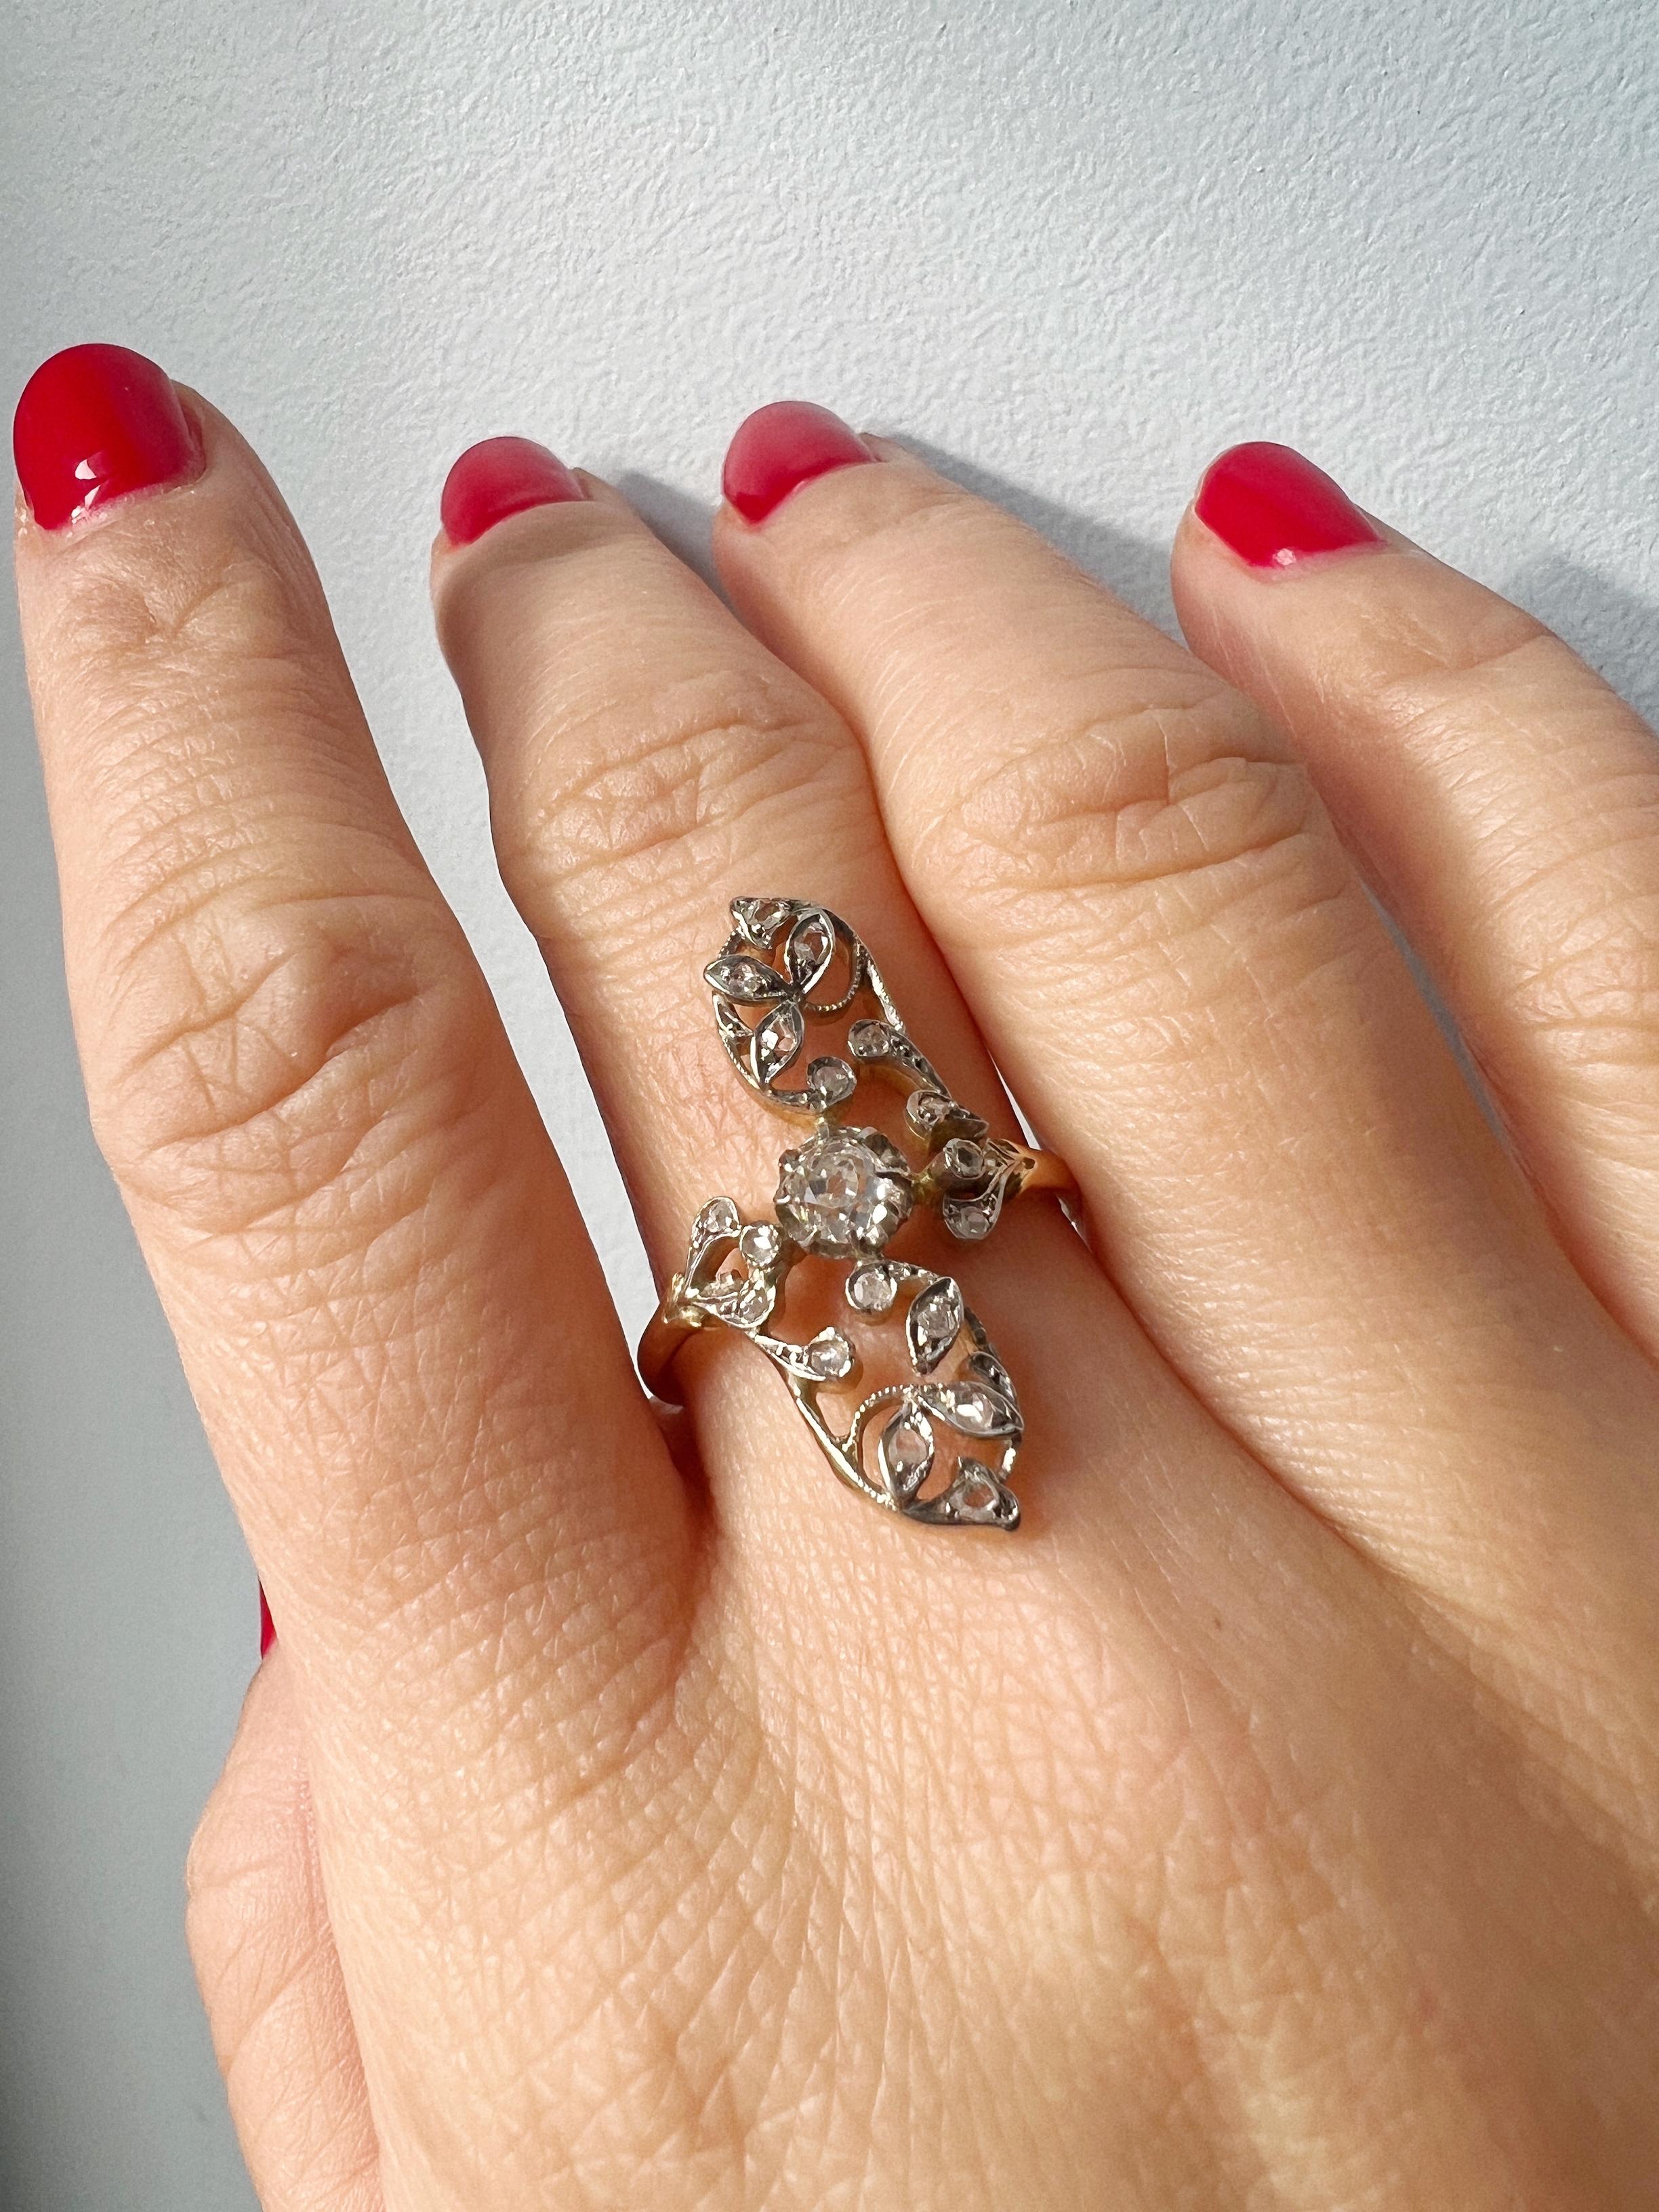 As the first spring bulbs start to make their appearance, it is the perfect time to wear your spring vibe jewelry!

For sale a beautiful 18K marquise ring featuring a floral head with flowing lines and leaves.

The central of the motif is made of an